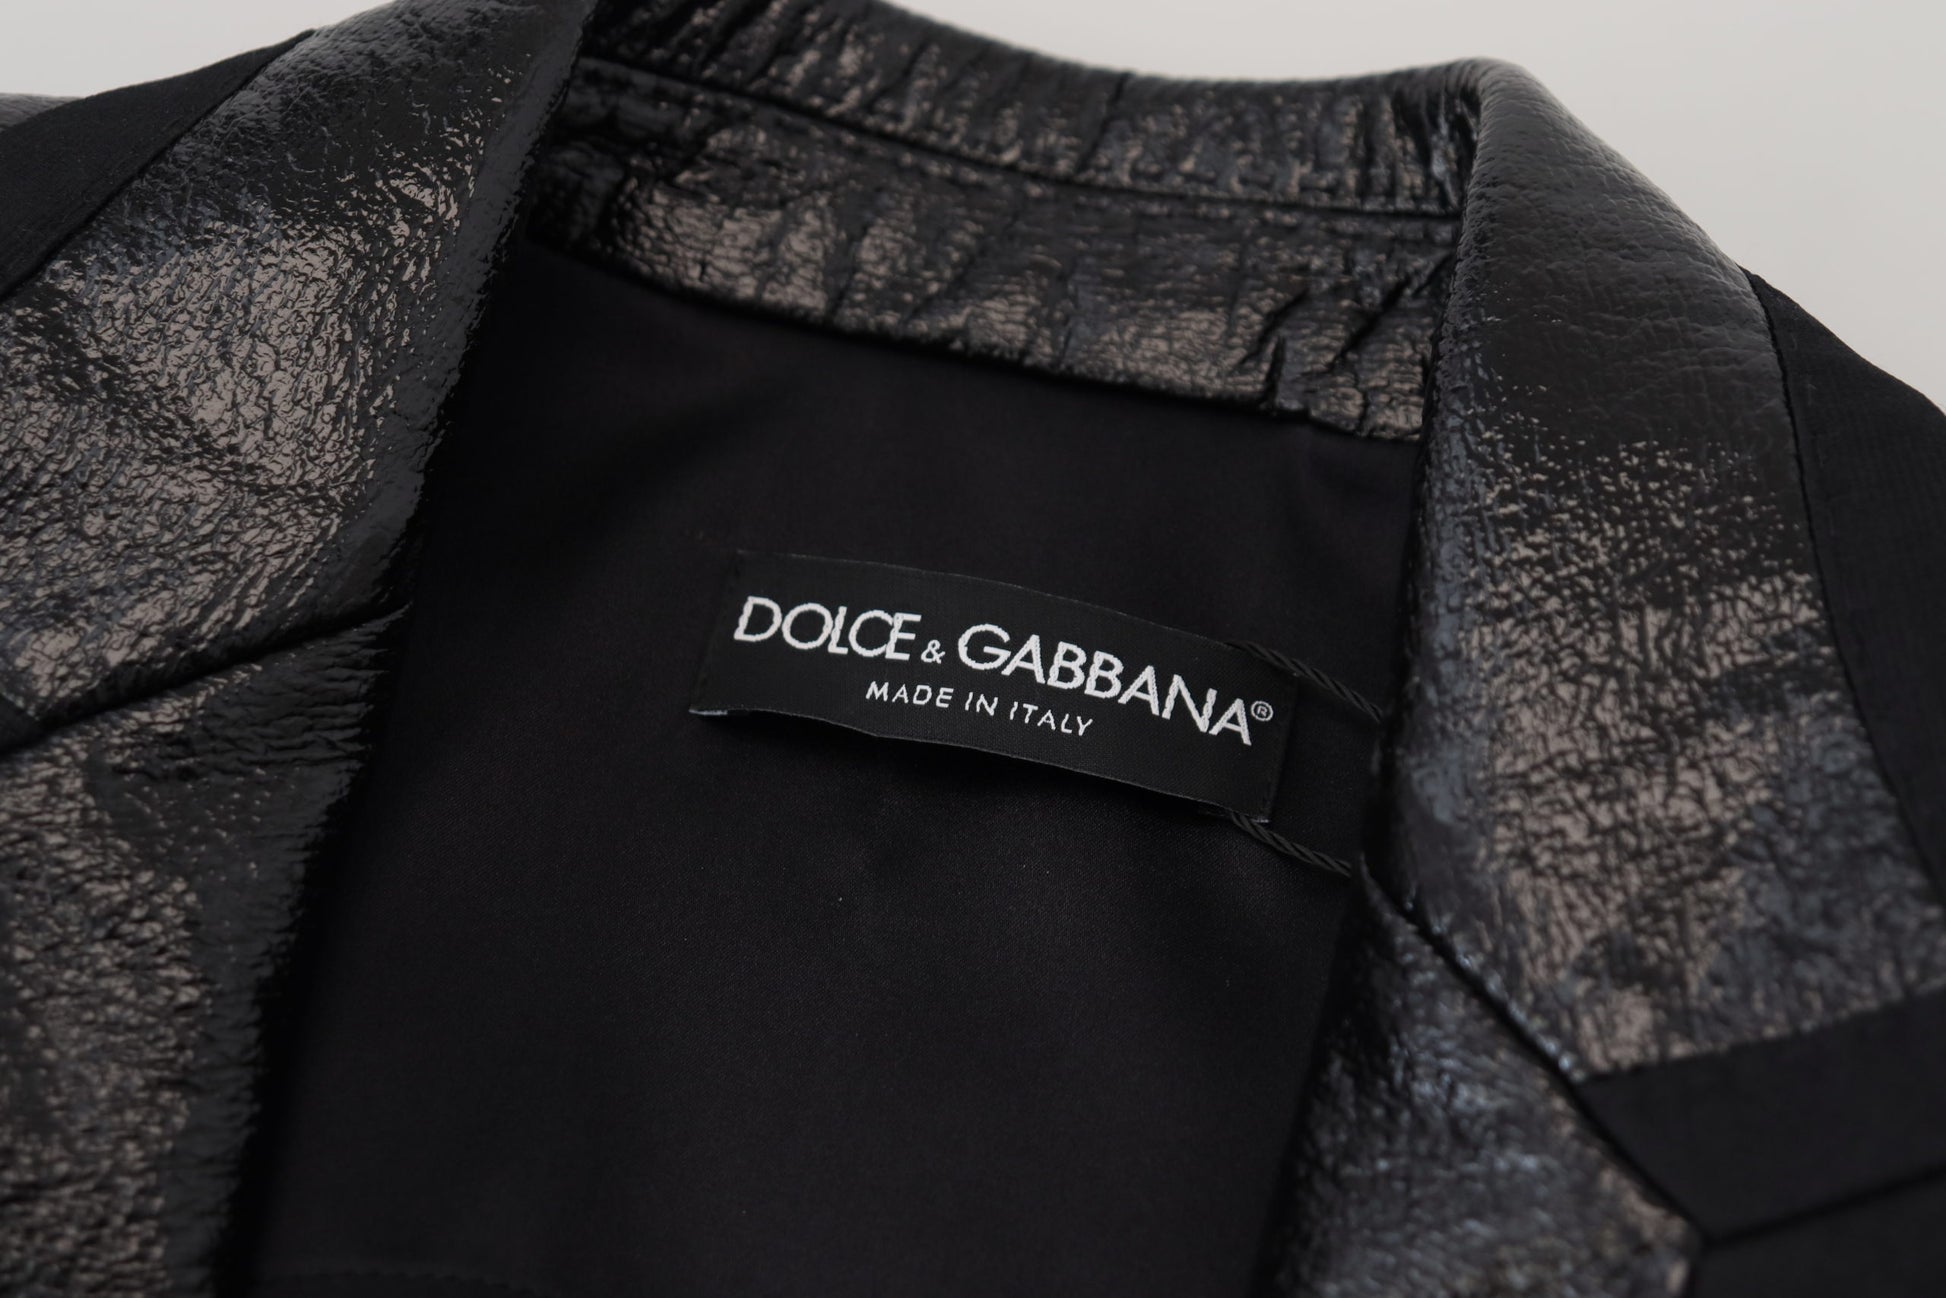 Dolce & Gabbana Black Long Sleeves Crop Blazer Cotton Jacket - Designed by Dolce & Gabbana Available to Buy at a Discounted Price on Moon Behind The Hill Online Designer Discount Store